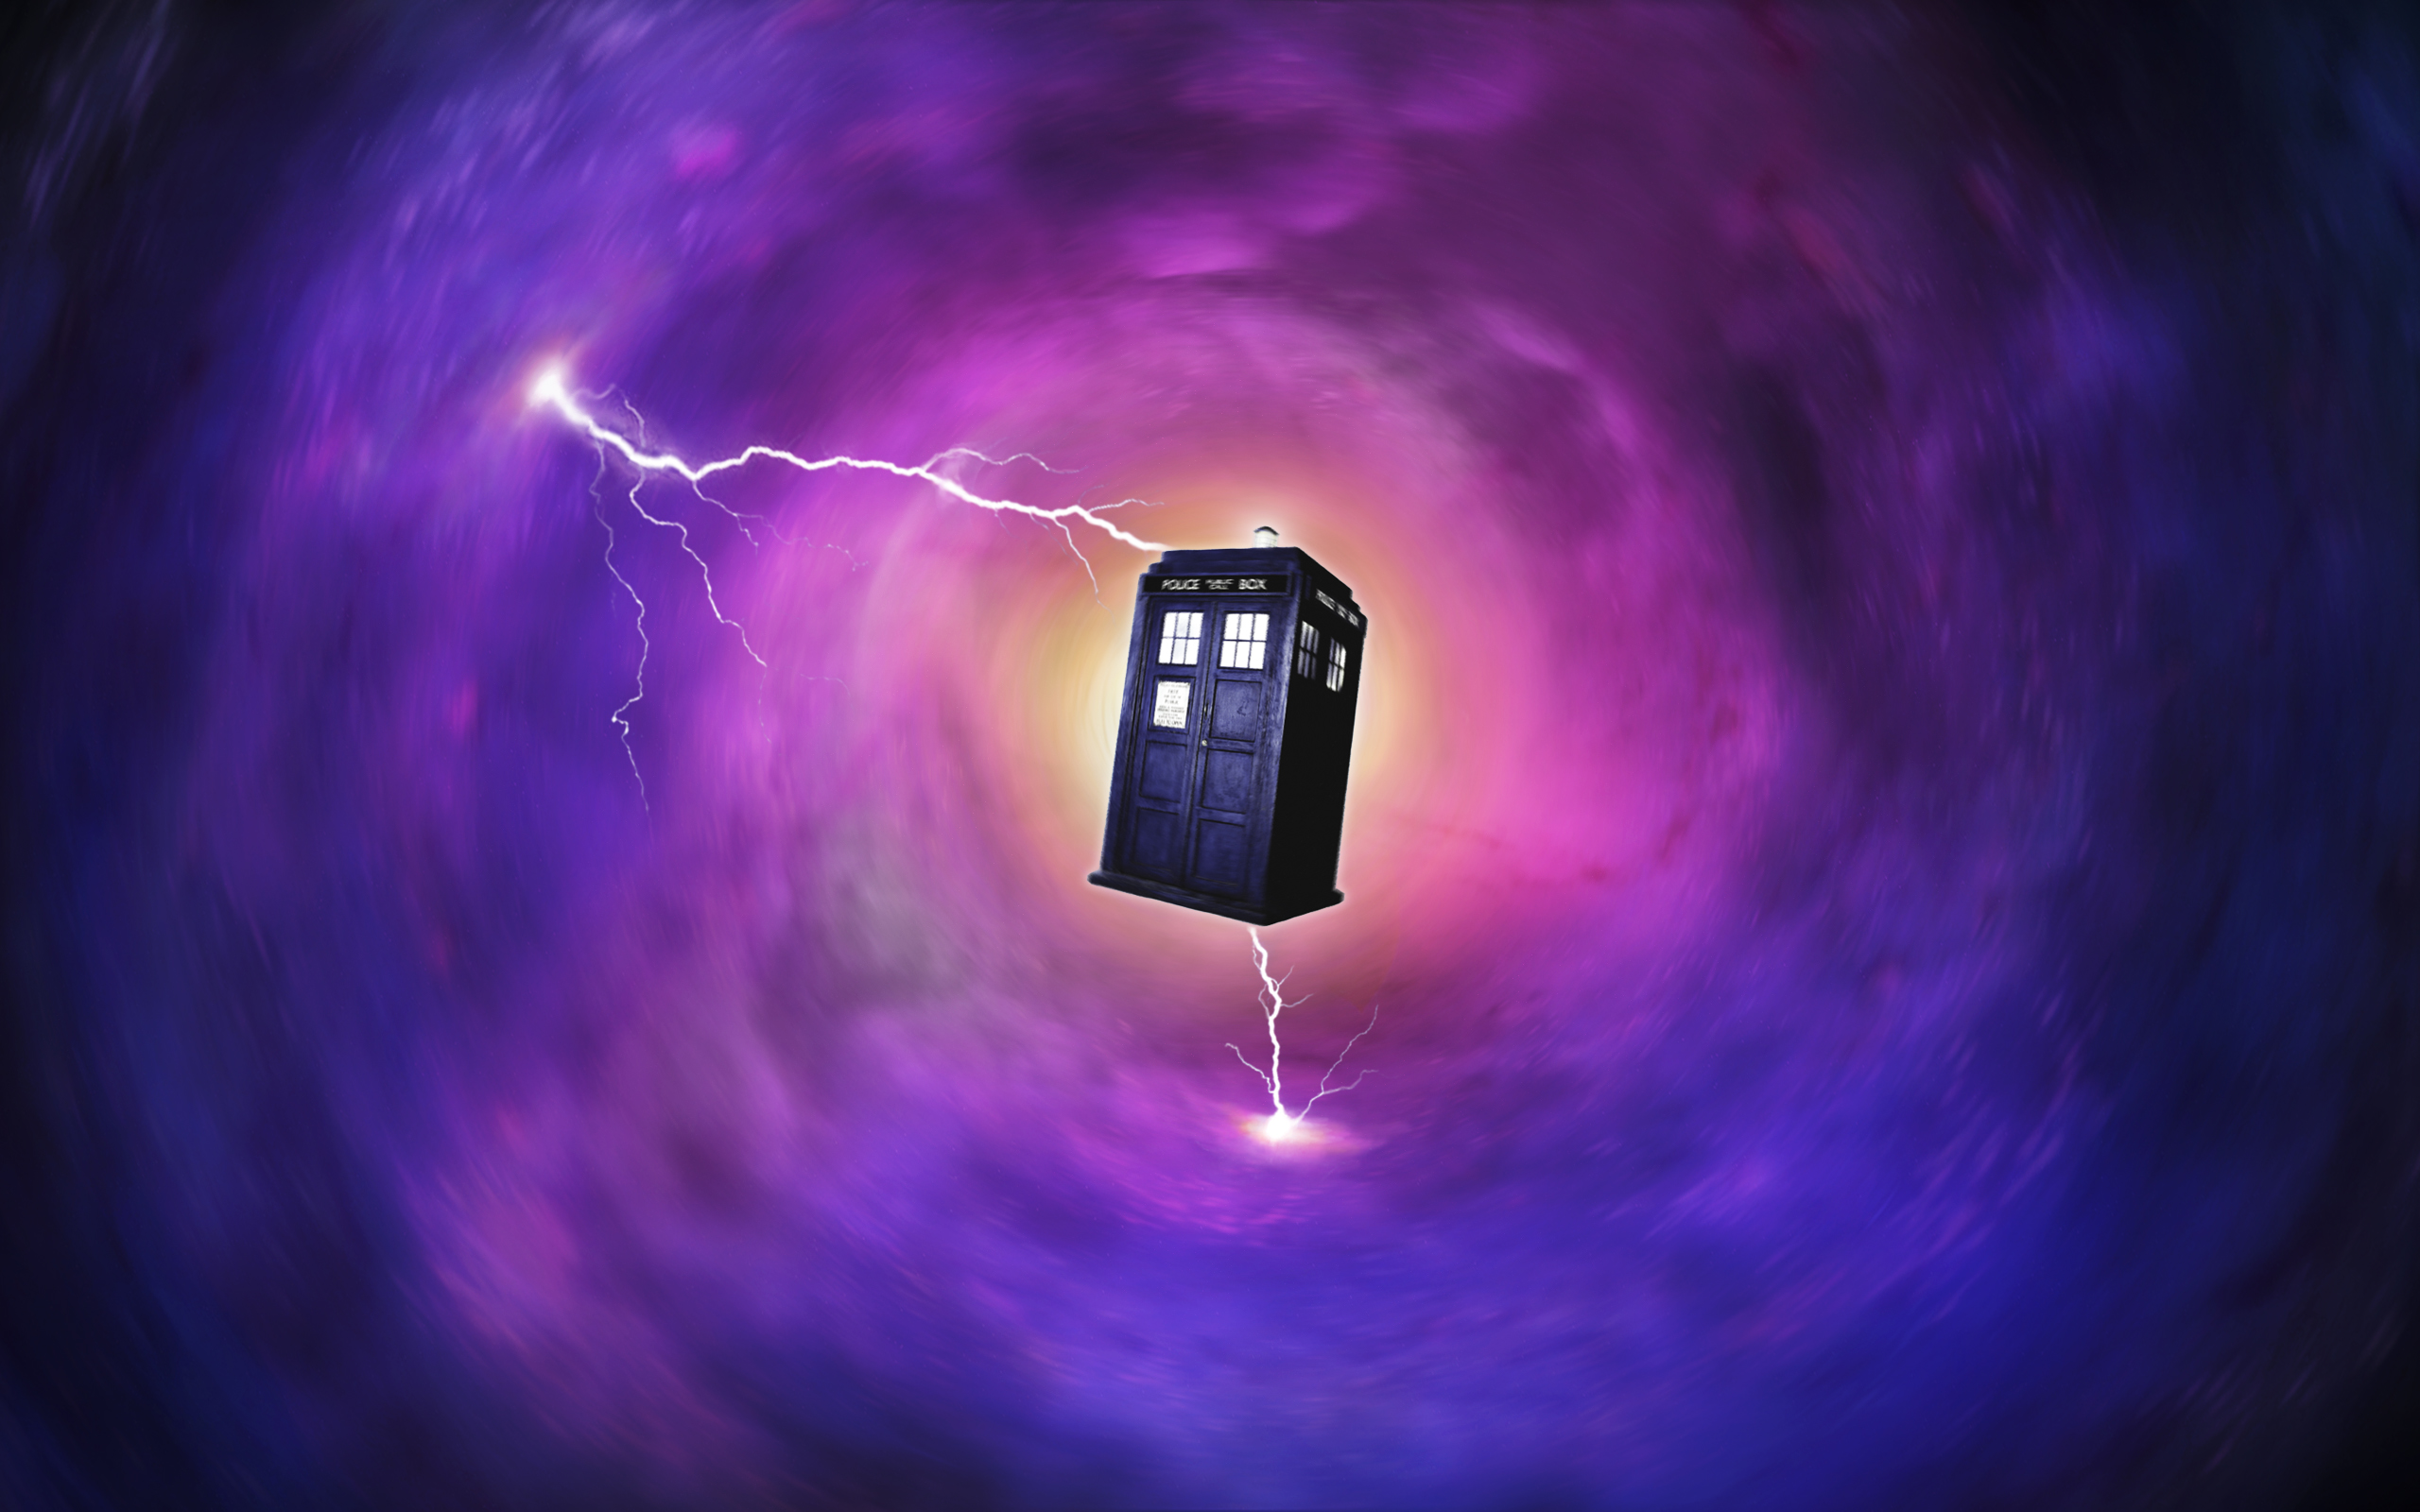 tardis, doctor who, tv show, lightning, telephone booth download HD wallpaper